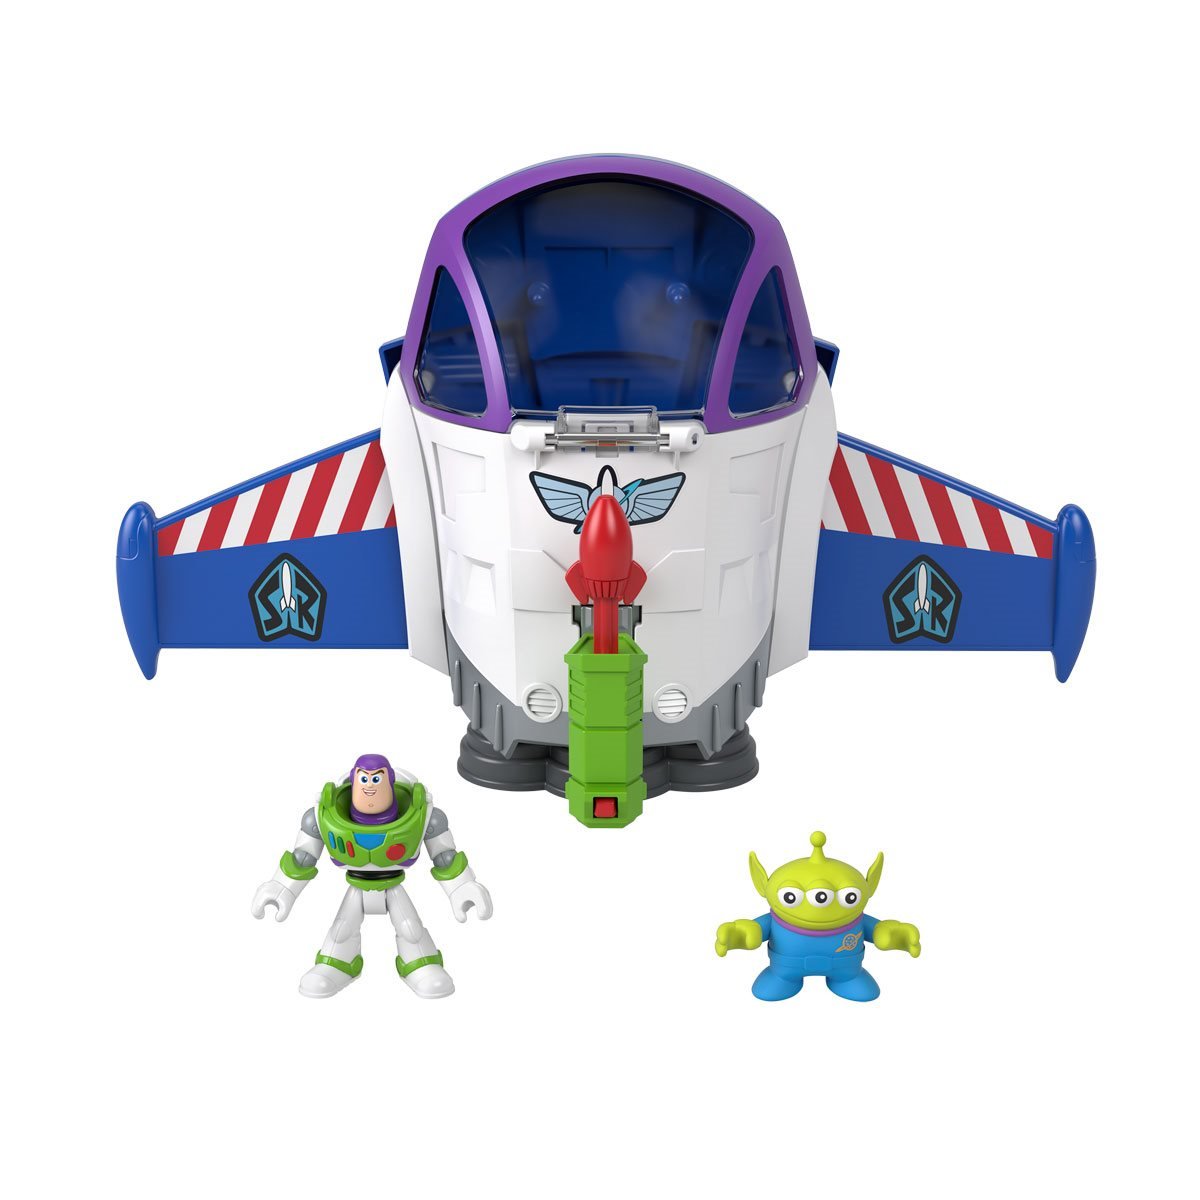 Disney Pixar Toy Story Fisher Price Imaginext Buzz Lightyear Space Mission Playset